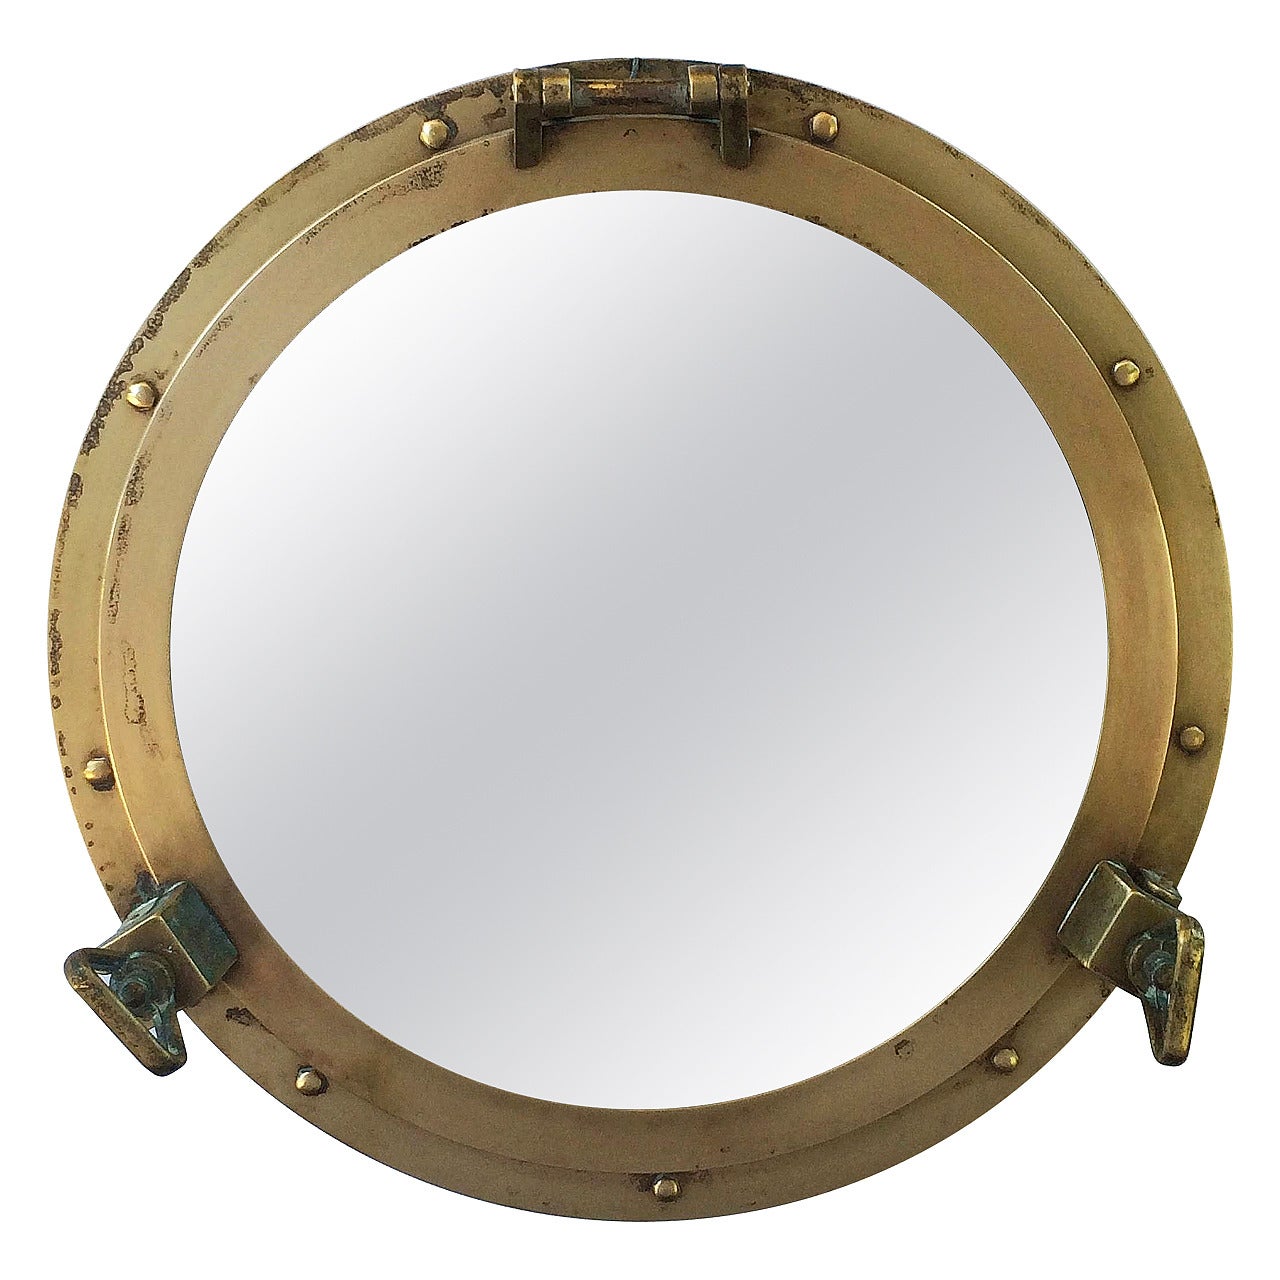 French Ship's Porthole Mirrors of Brass (18 1/2" Diameter)